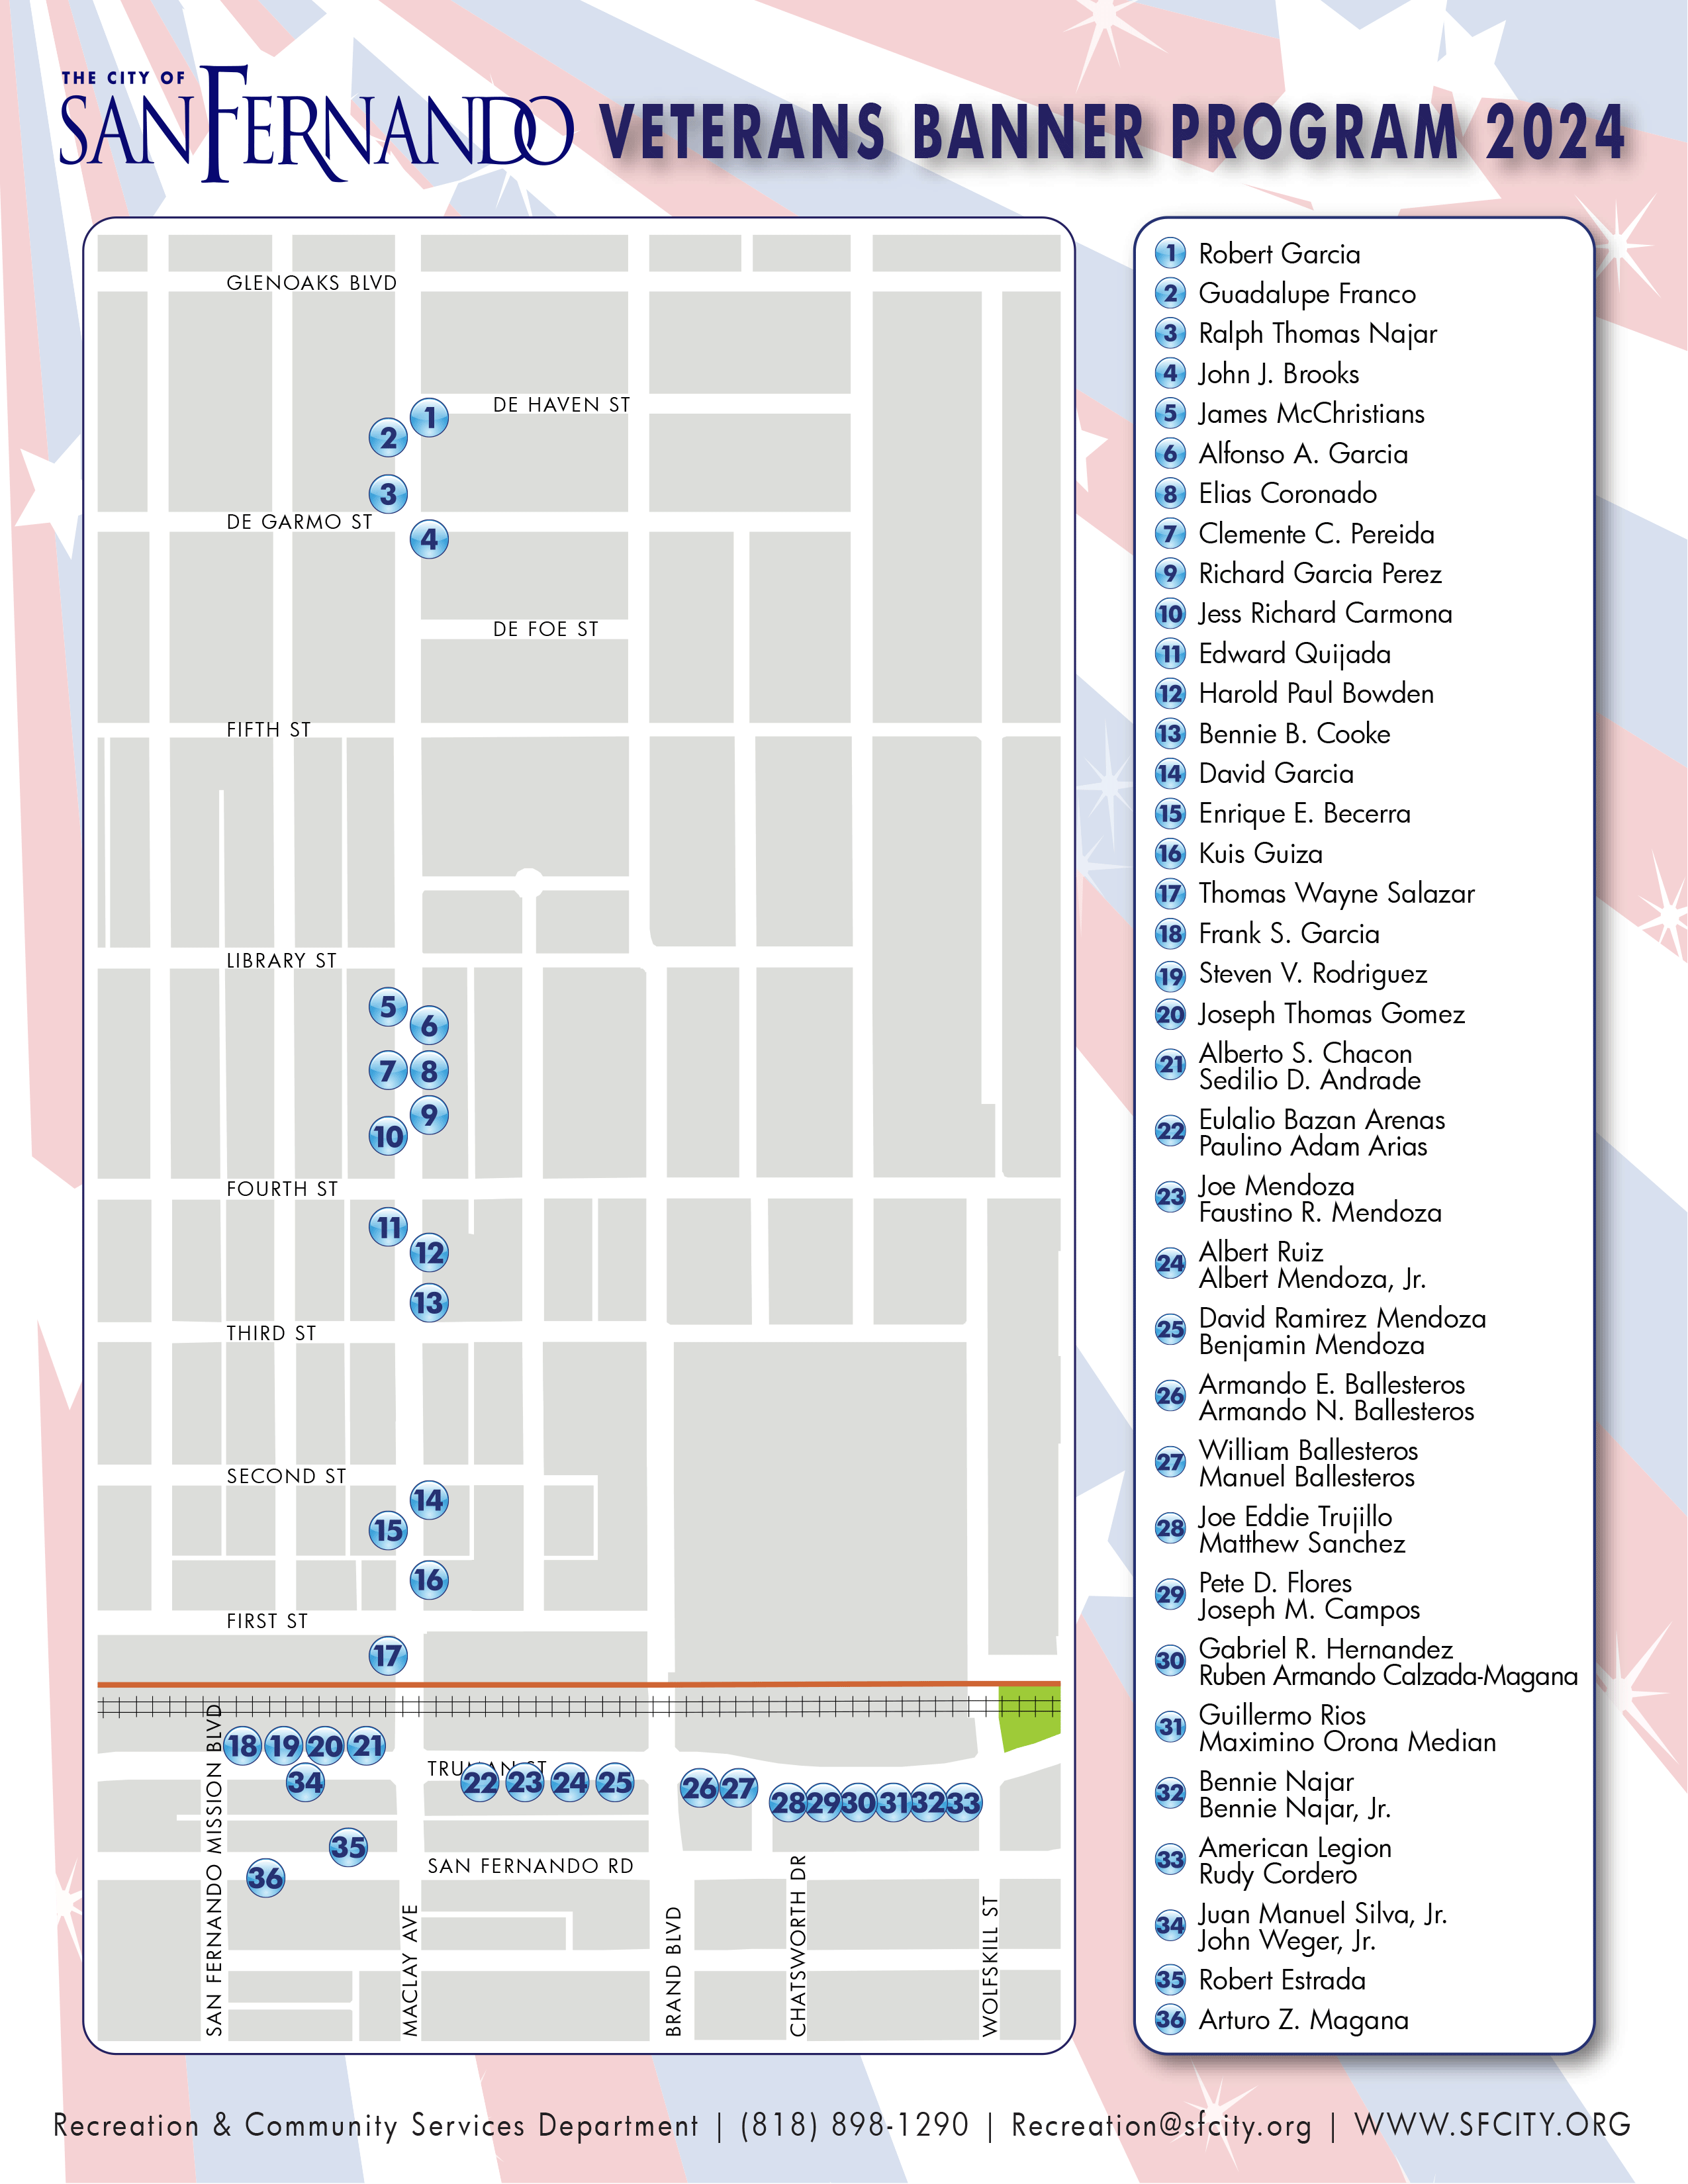 The City of San Fernando Veterans Banner Program 2024," showing the locations of banners honoring veterans. Each location is marked with a blue dot and a number. A legend on the right lists the names corresponding to each number. The map covers streets including Glenoaks Blvd, De Garmo St, Fifth St, Library St, Fourth St, Third St, Second St, First St, San Fernando Mission Blvd, Truman St, and San Fernando Rd. Contact information for the Recreation & Community Services Department is provided at the bottom.